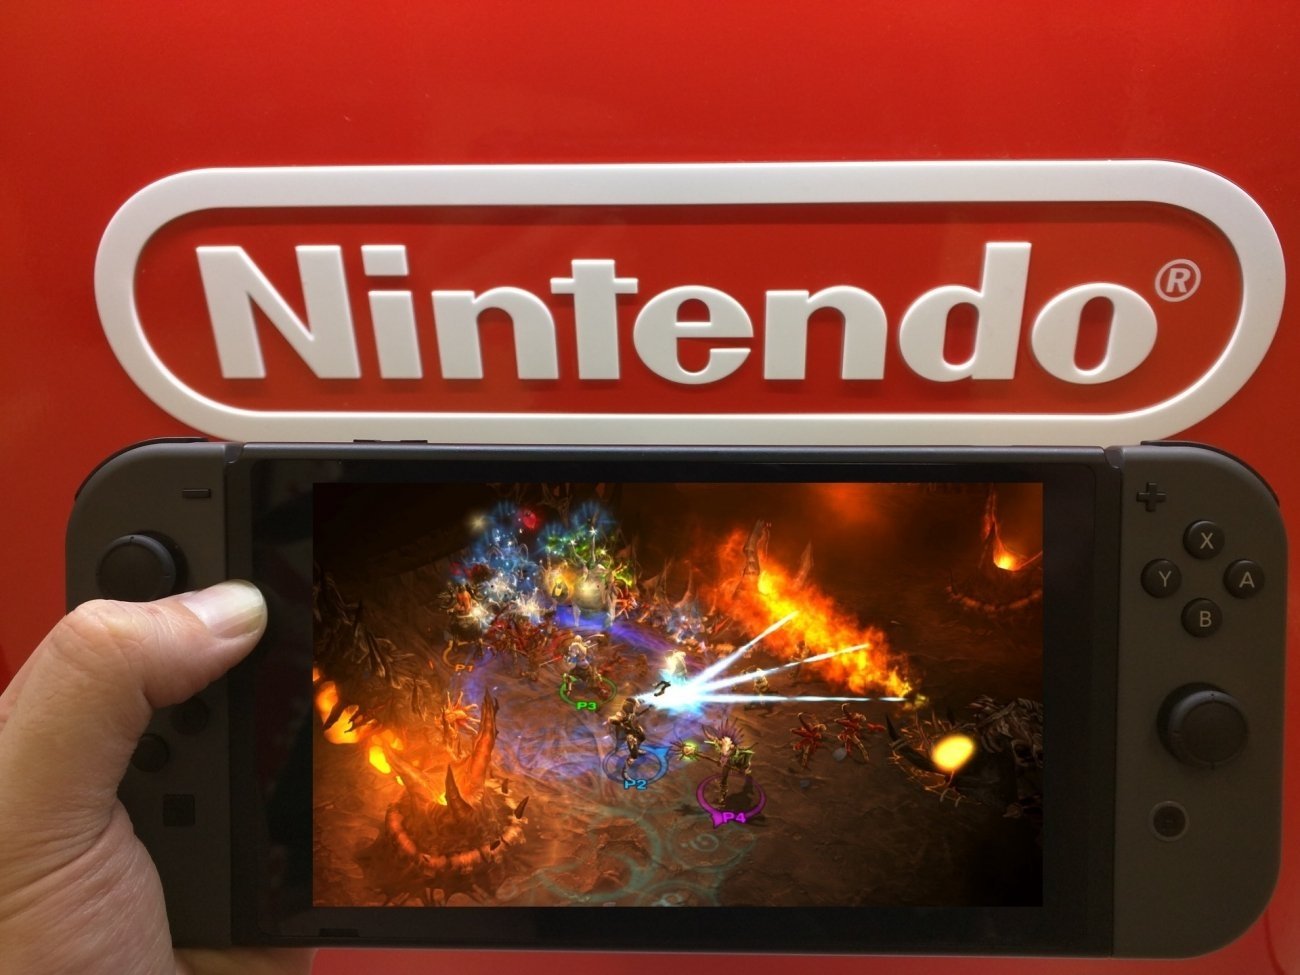 is diablo 4 going to be on the nintendo switch?